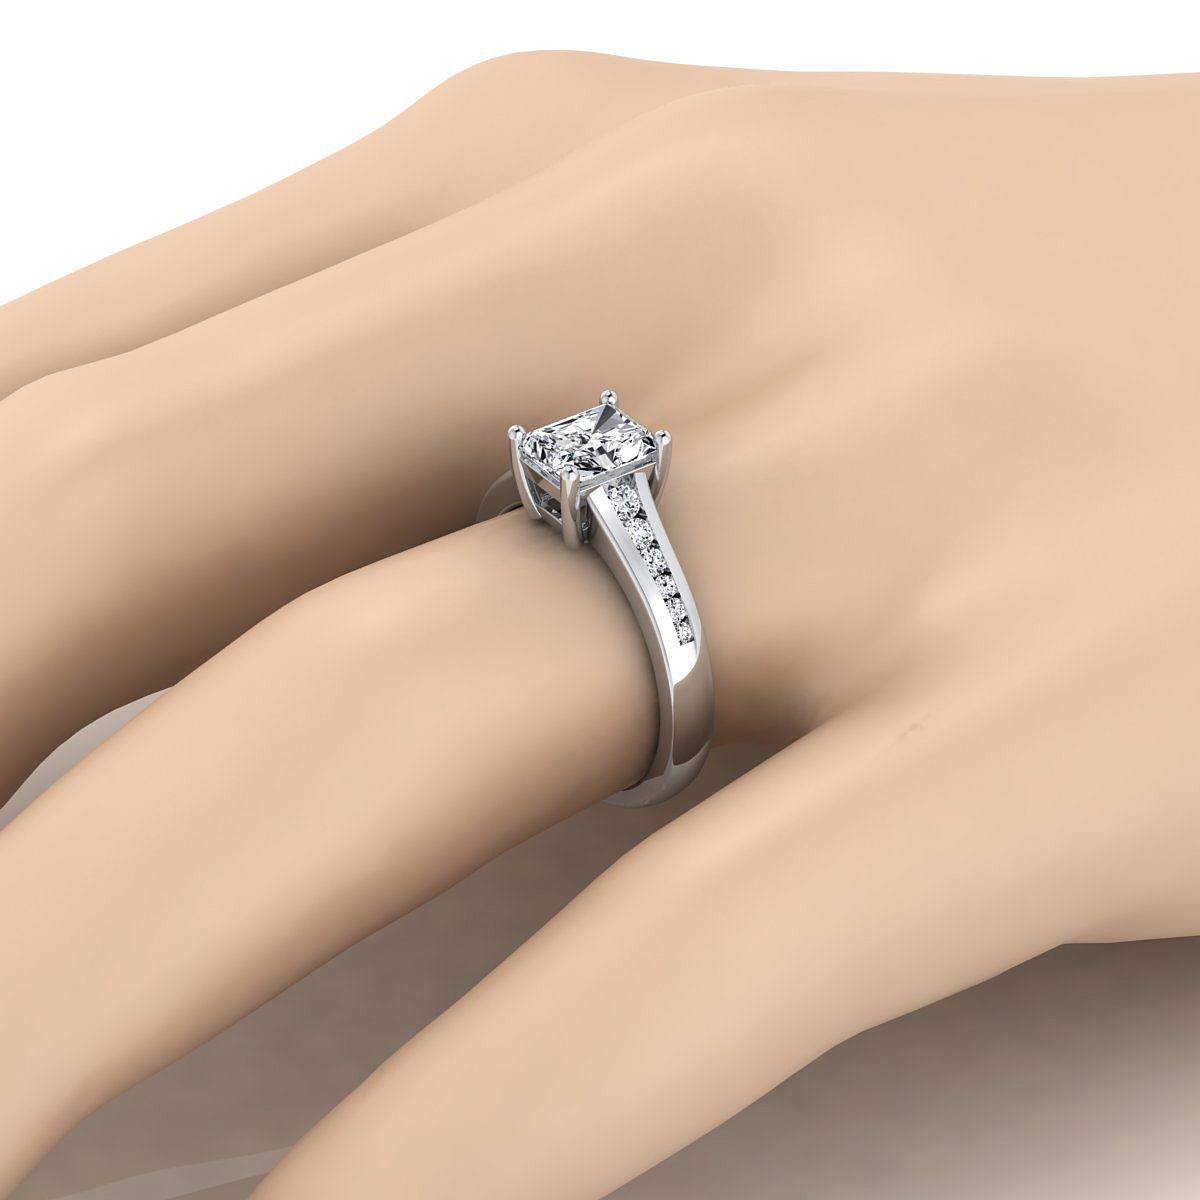 18K White Gold Radiant Cut Center Contemporary Tapered Diamond Channel Engagement Ring -1/6ctw